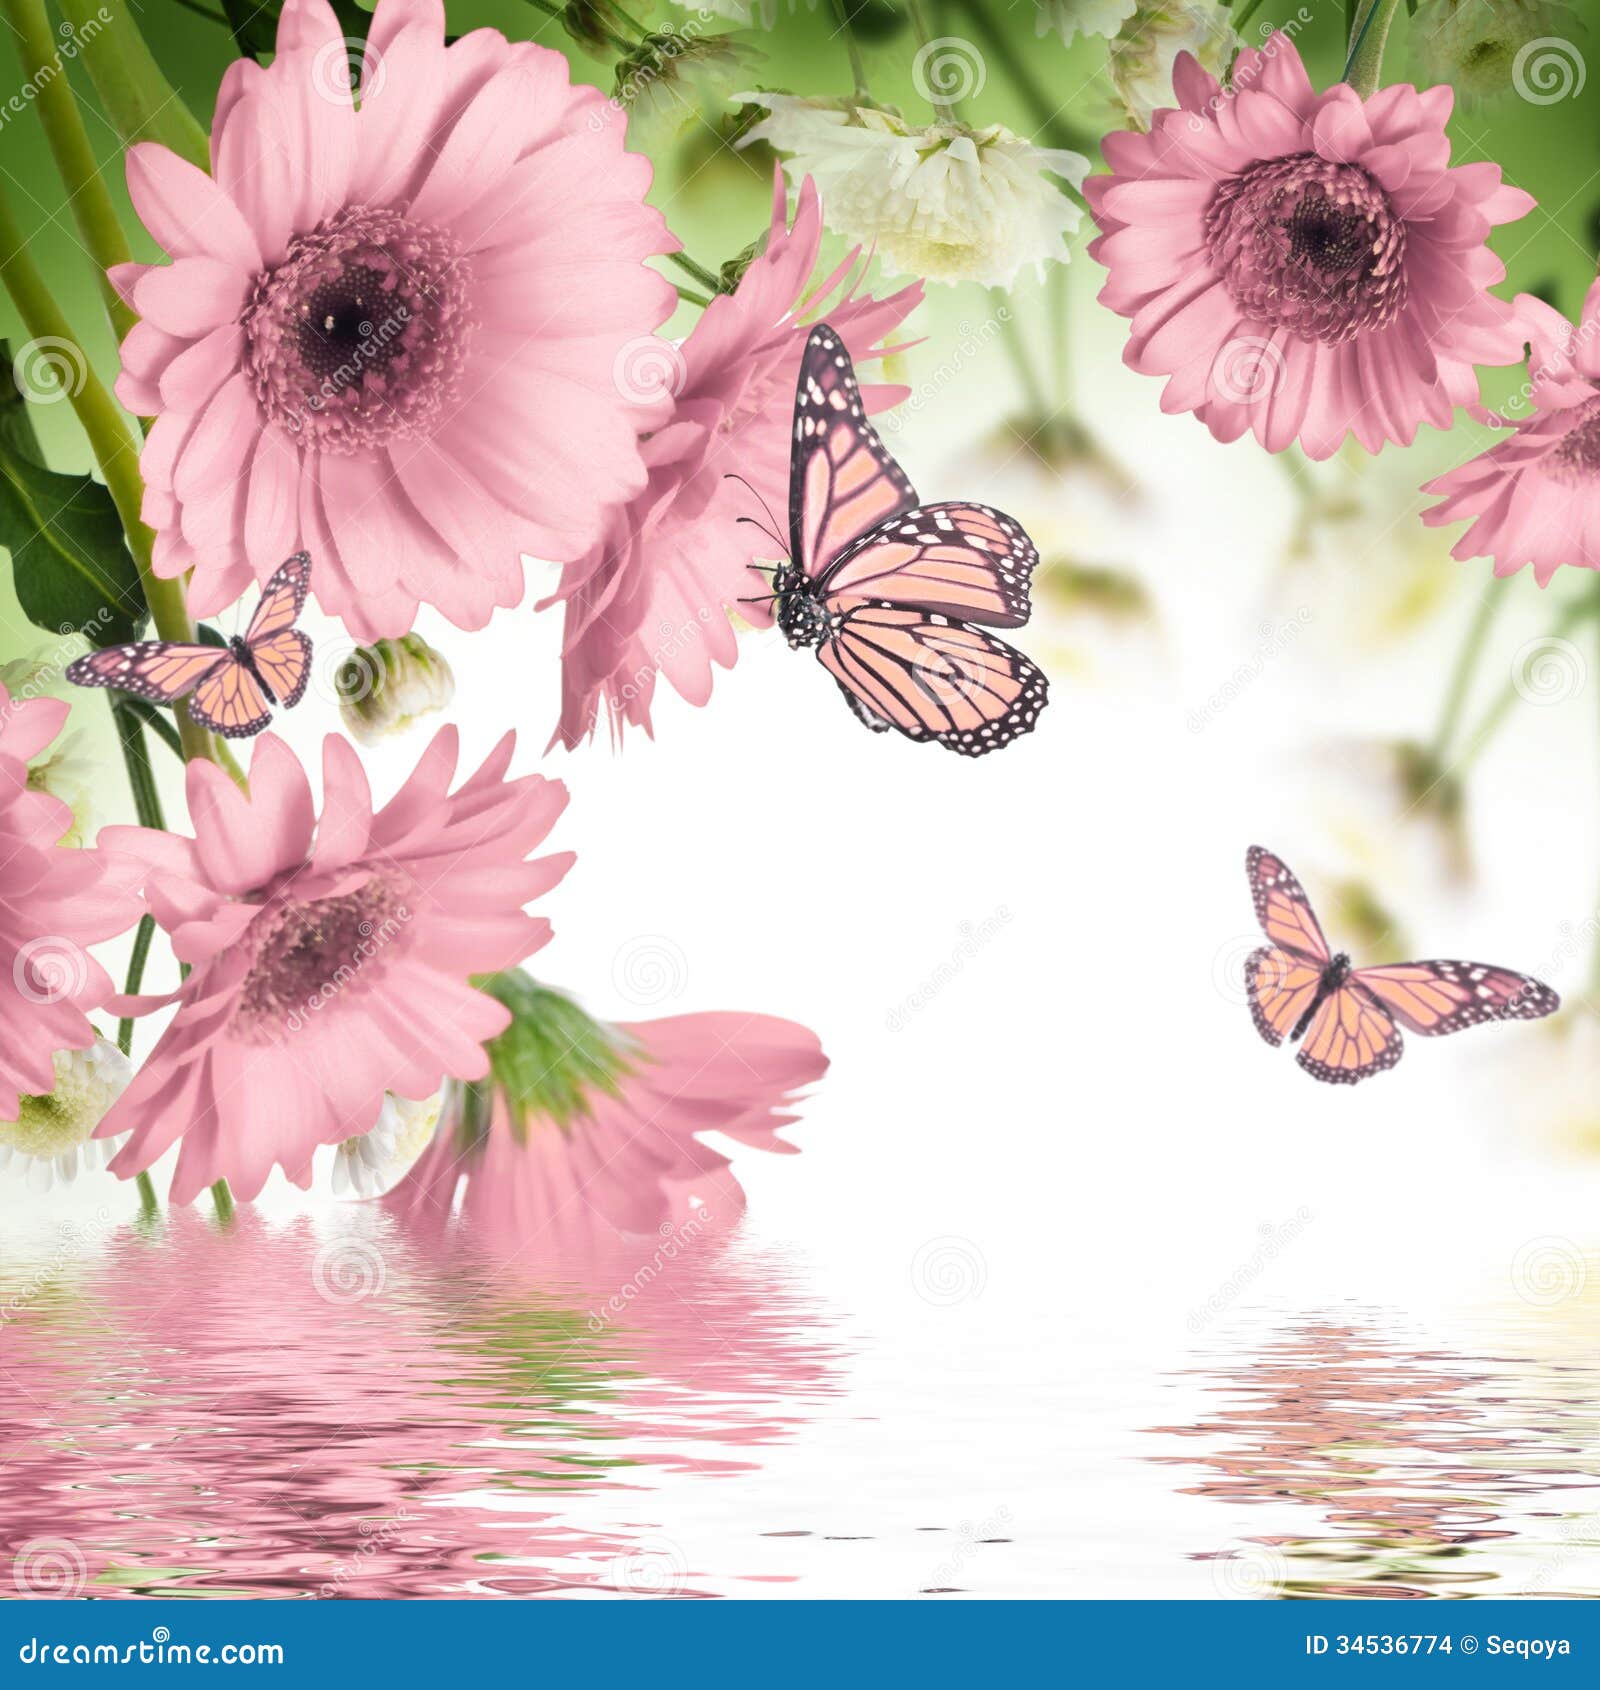 Gerbera Daisies And Butterfly Stock Photo - Image: 34536774